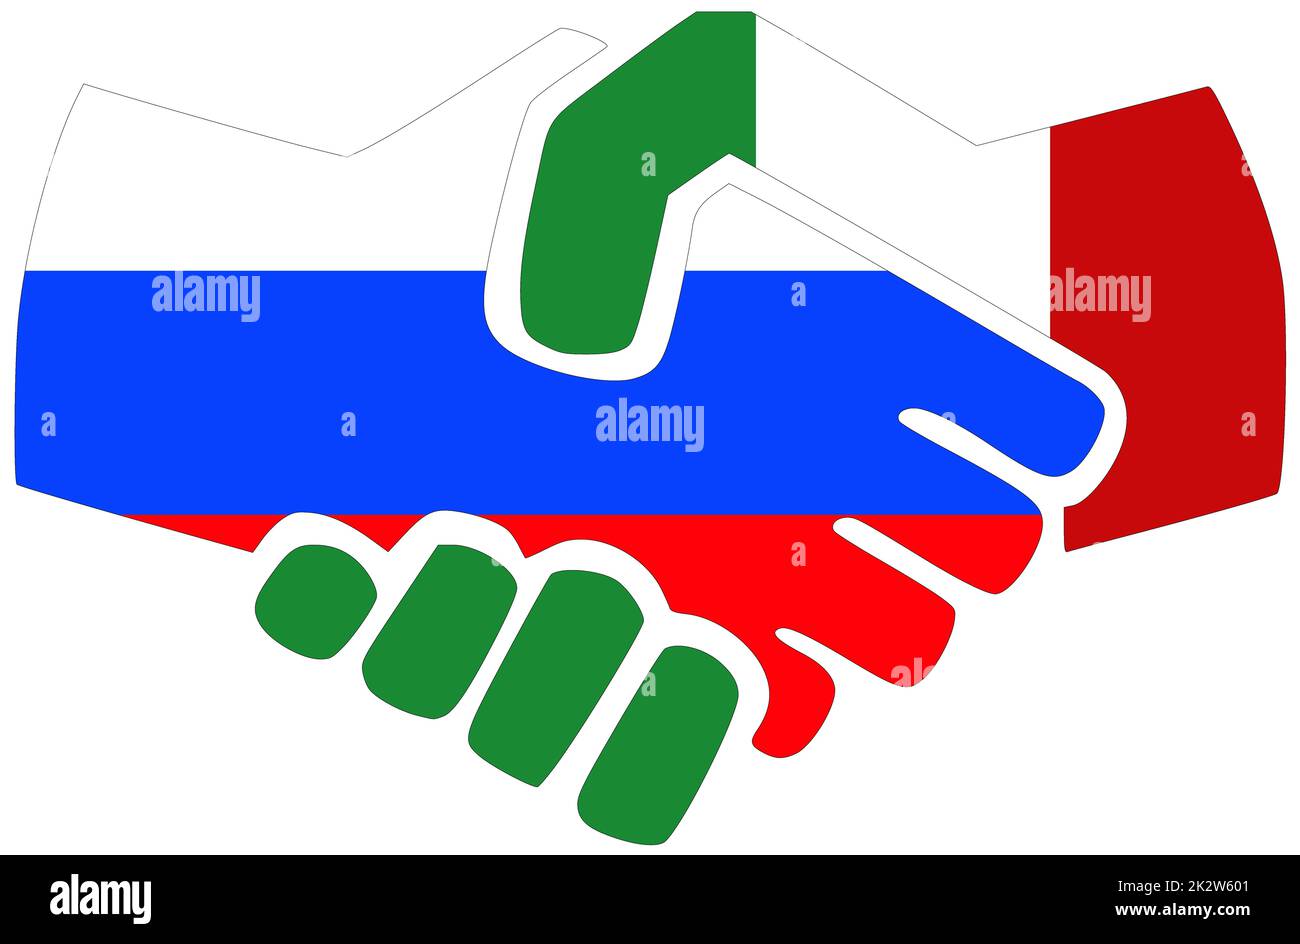 Russia - Italy : Handshake, symbol of agreement or friendship Stock Photo